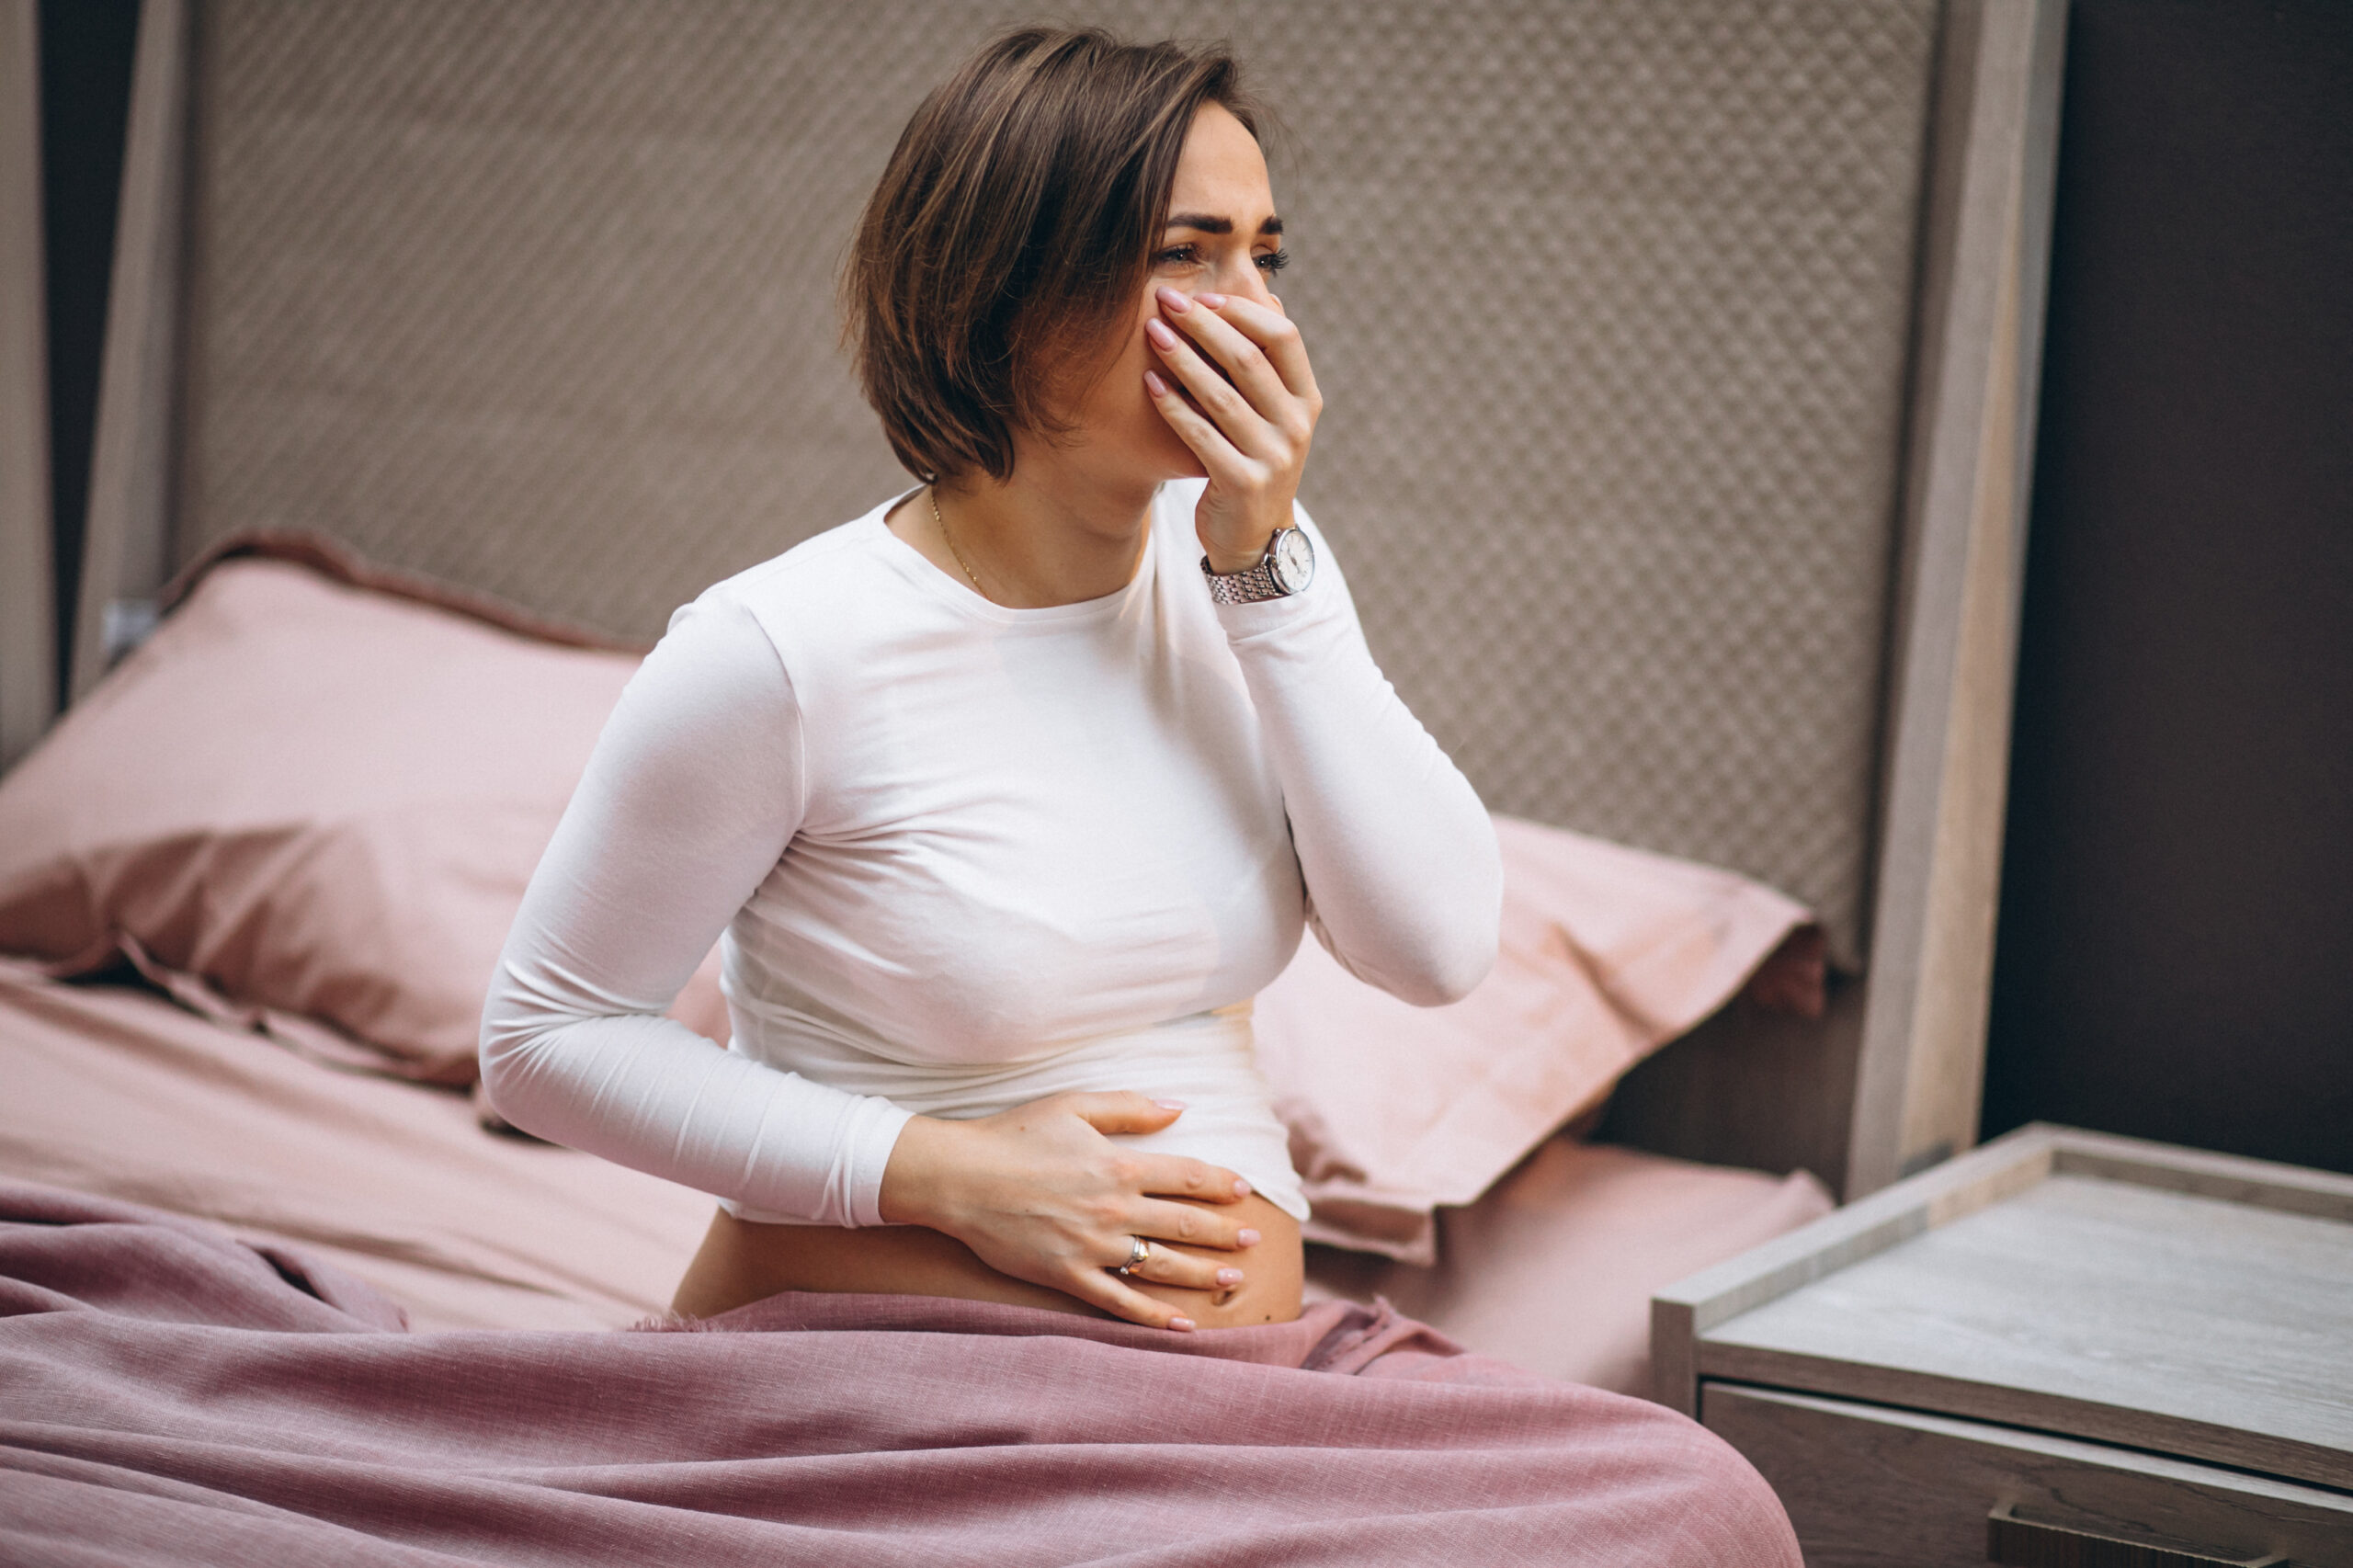 Managing Nausea, Vomiting, and Digestive Function During Pregnancy